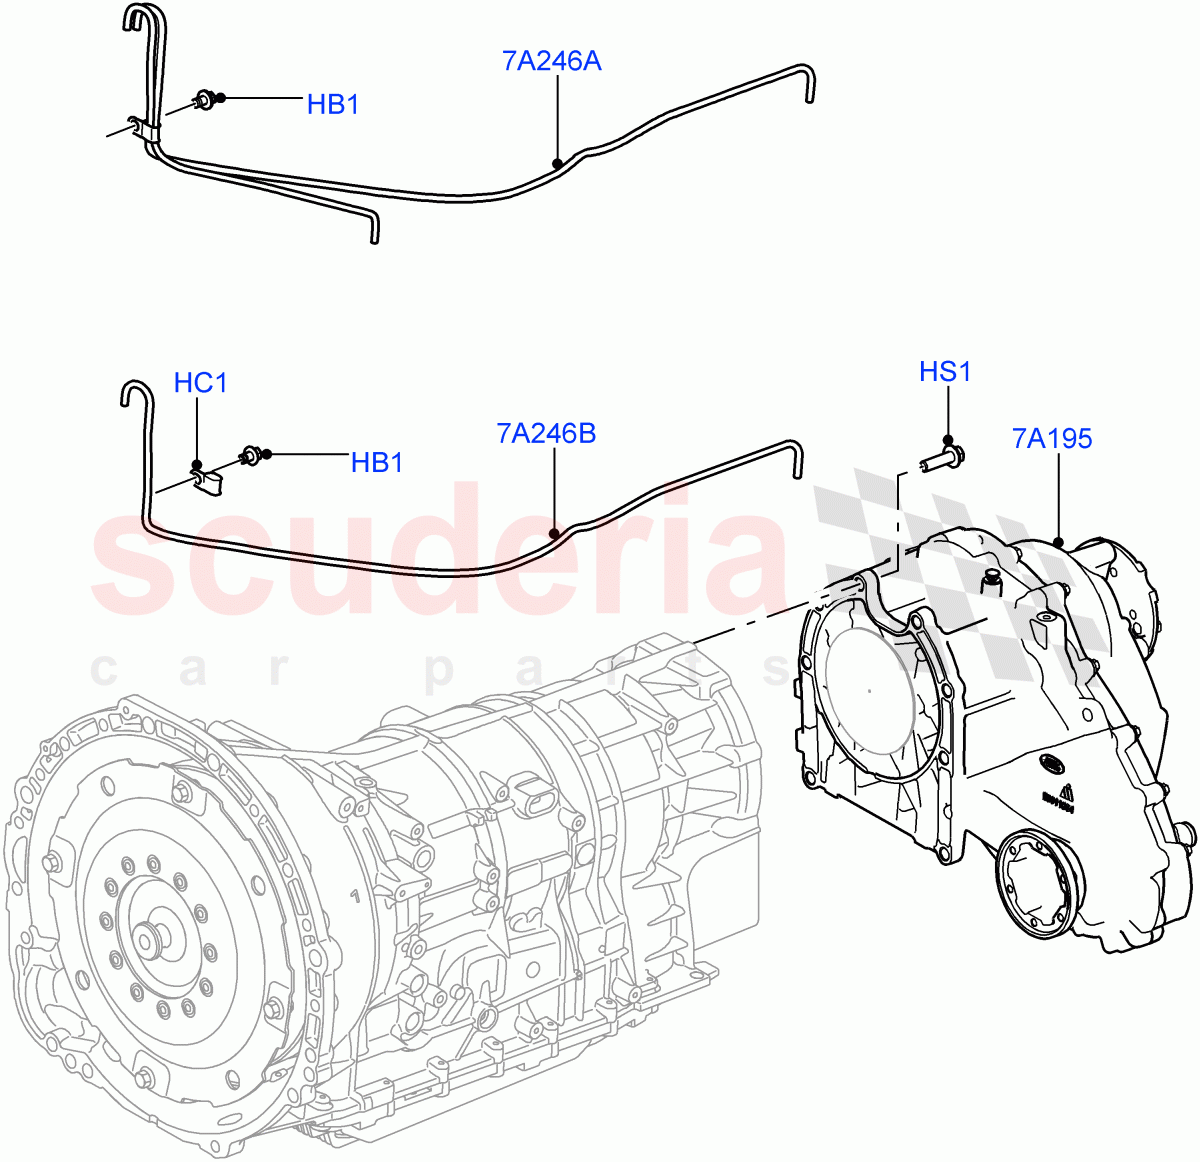 Transfer Drive Case(8 Speed Auto Trans ZF 8HP70 4WD,With 1 Speed Transfer Case,8 Speed Auto Trans ZF 8HP45)((V)FROMEA000001,(V)TOGA999999) of Land Rover Land Rover Range Rover (2012-2021) [5.0 OHC SGDI NA V8 Petrol]